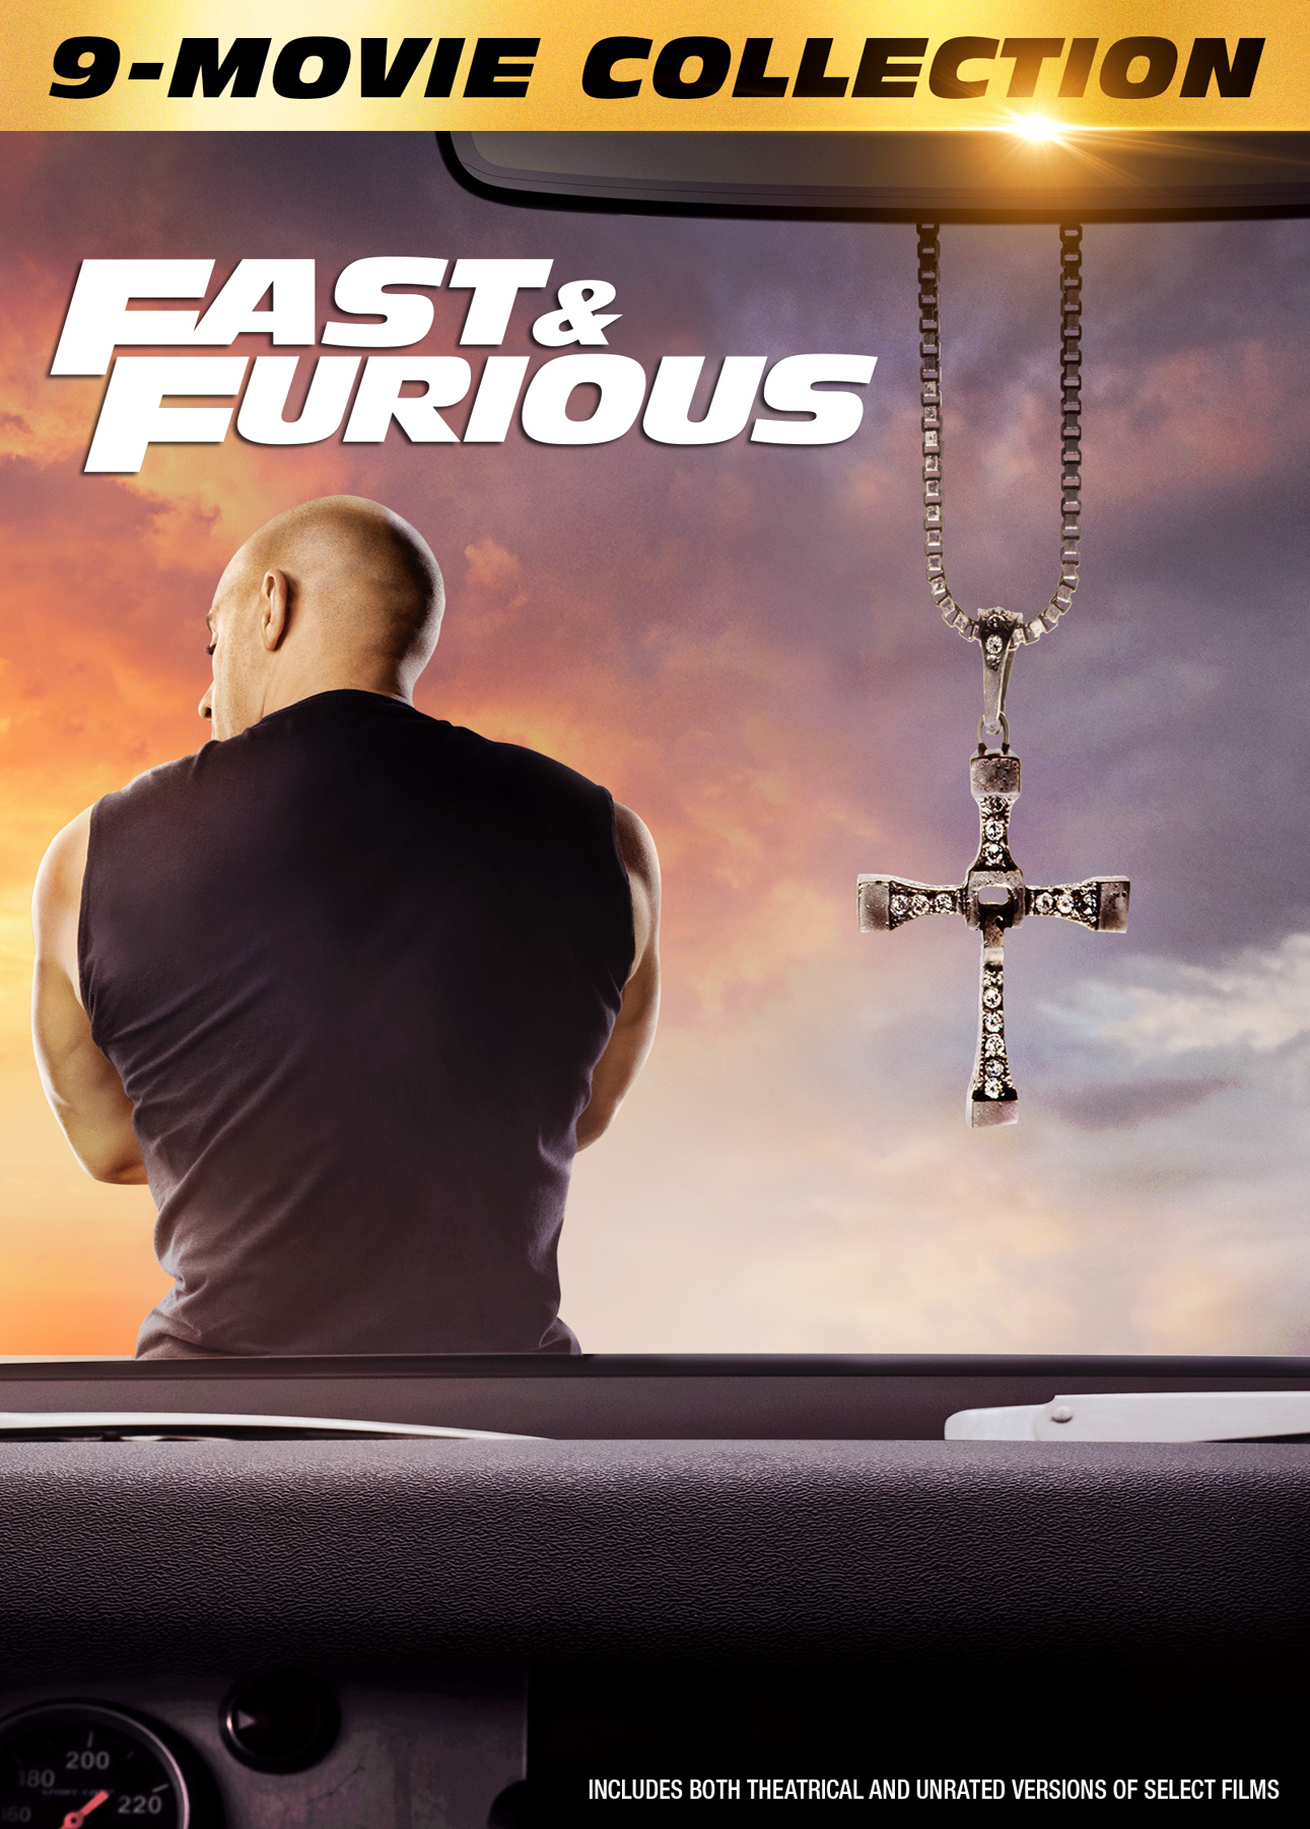 Fast & Furious: 9-movie Collection (dvd) : Target